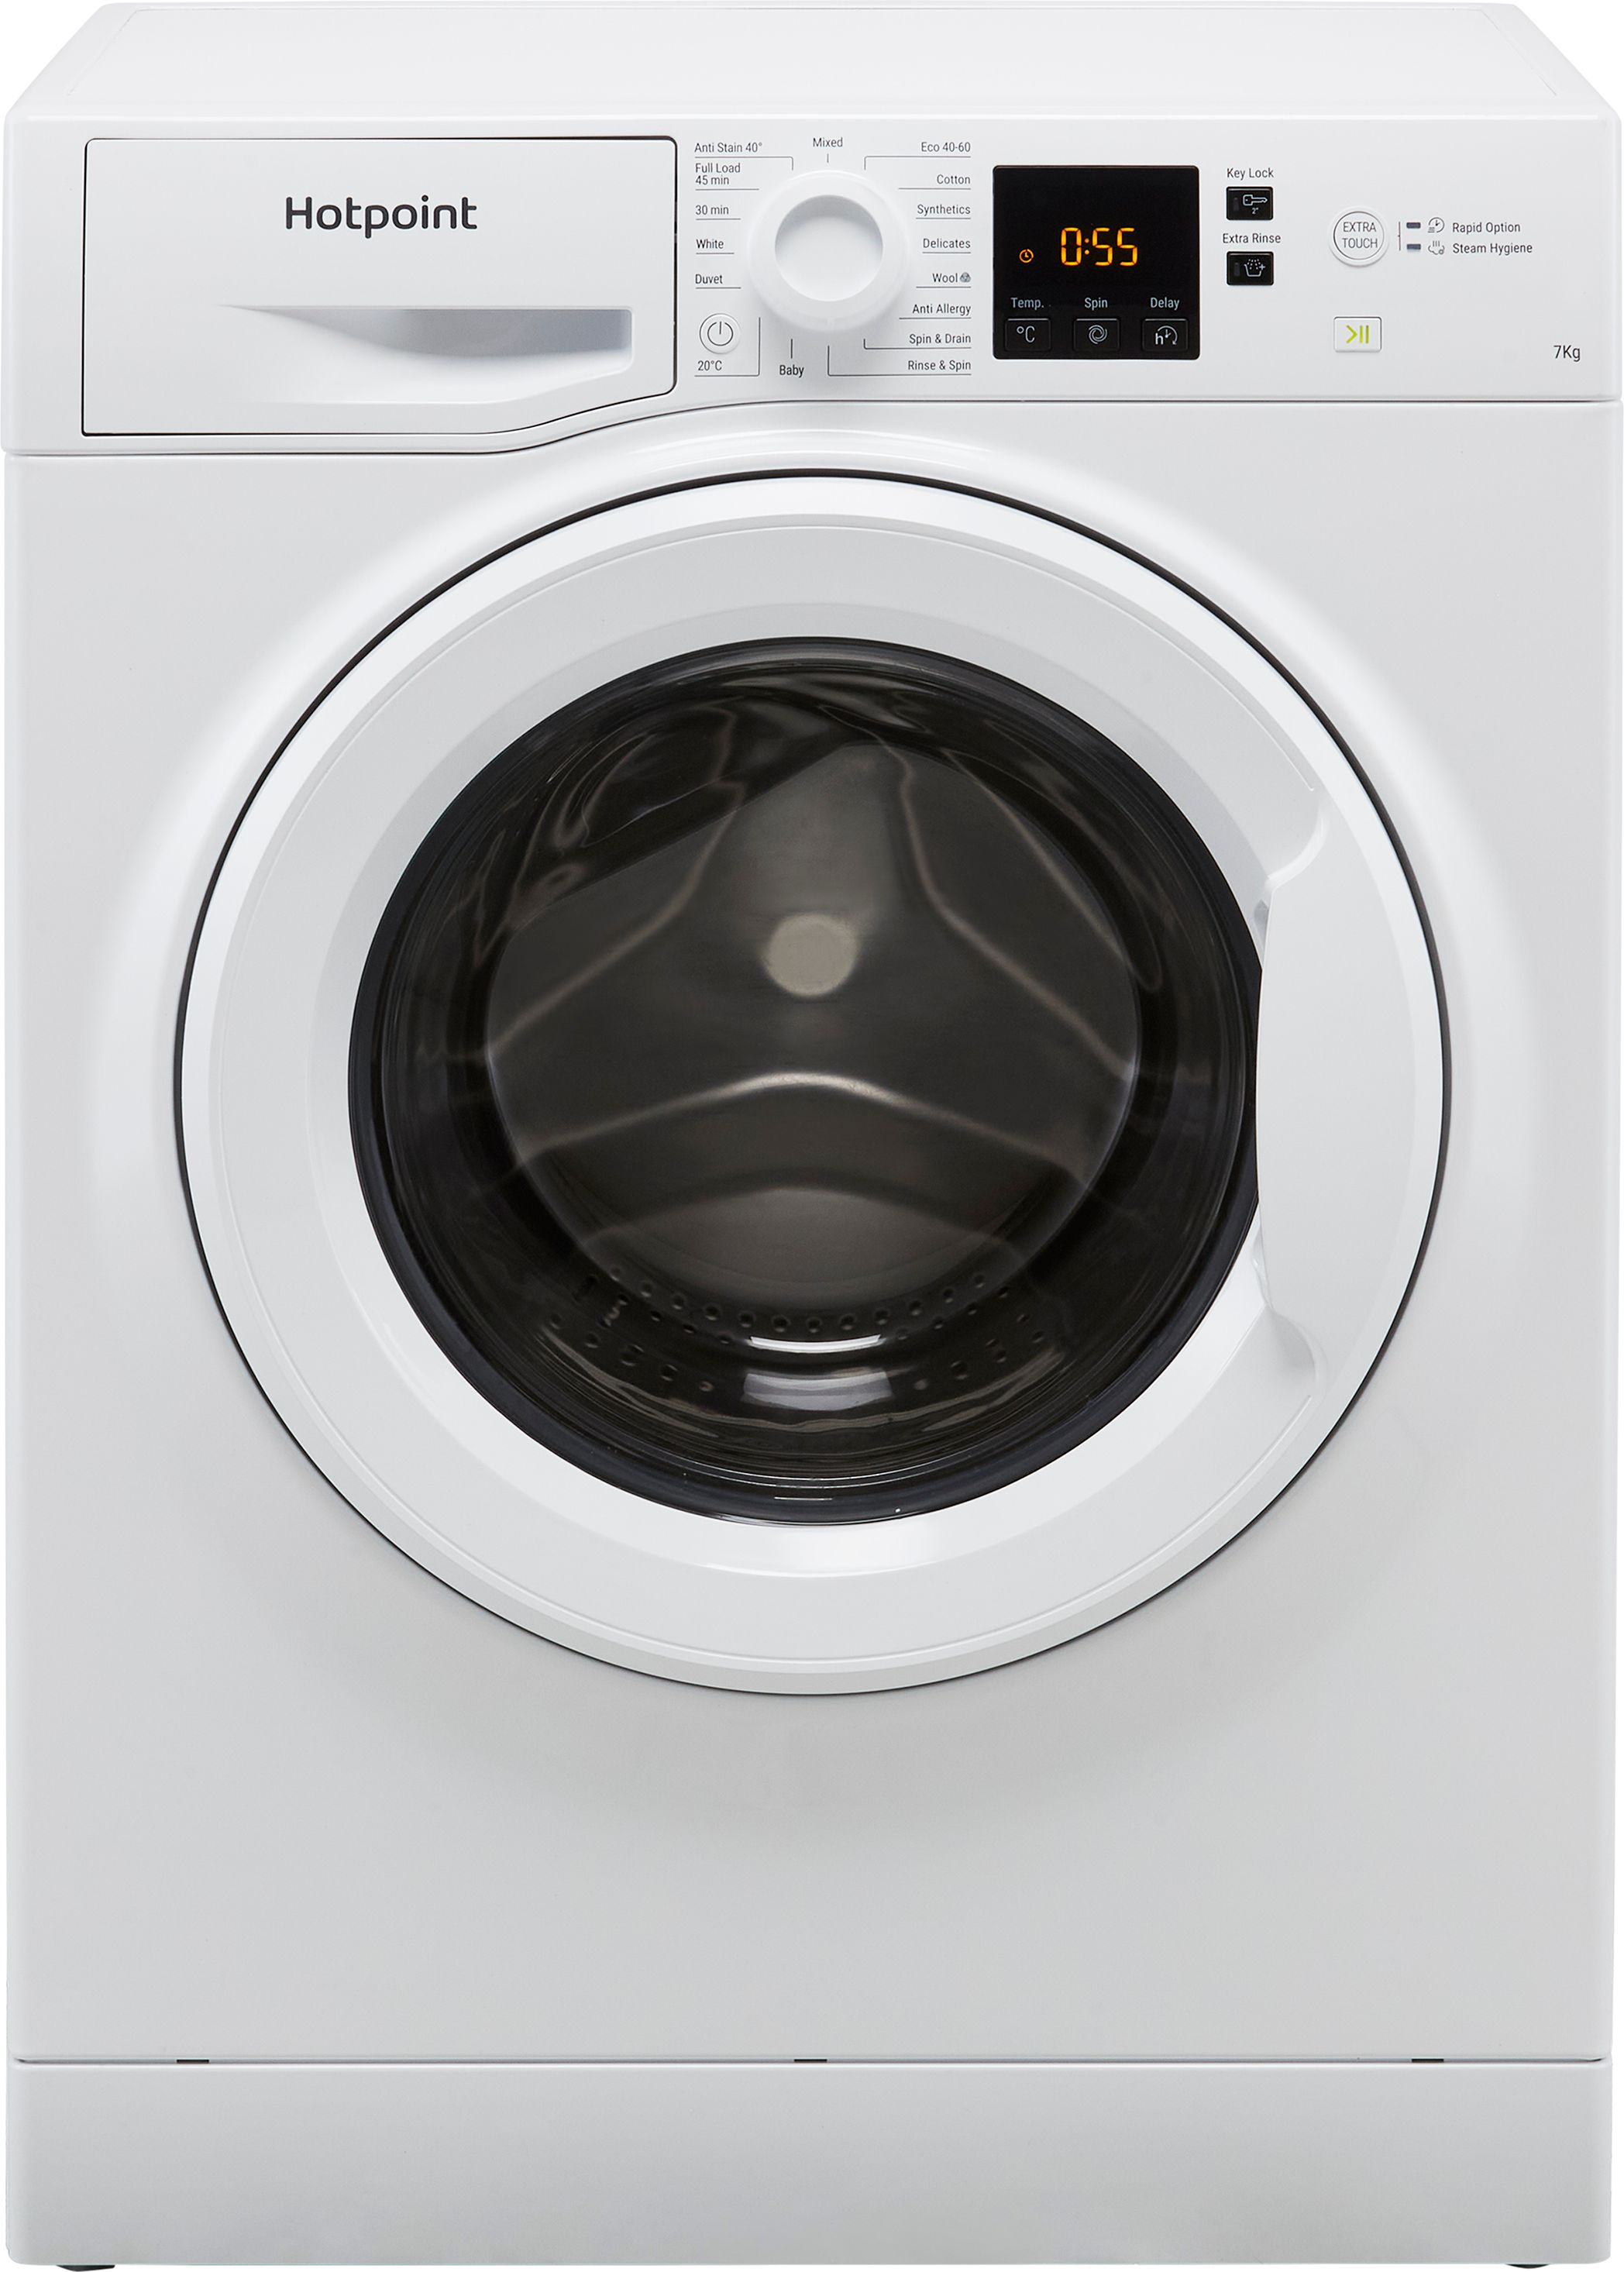 Hotpoint NSWM743UWUKN 7kg Washing Machine with 1400 rpm - White - D Rated, White